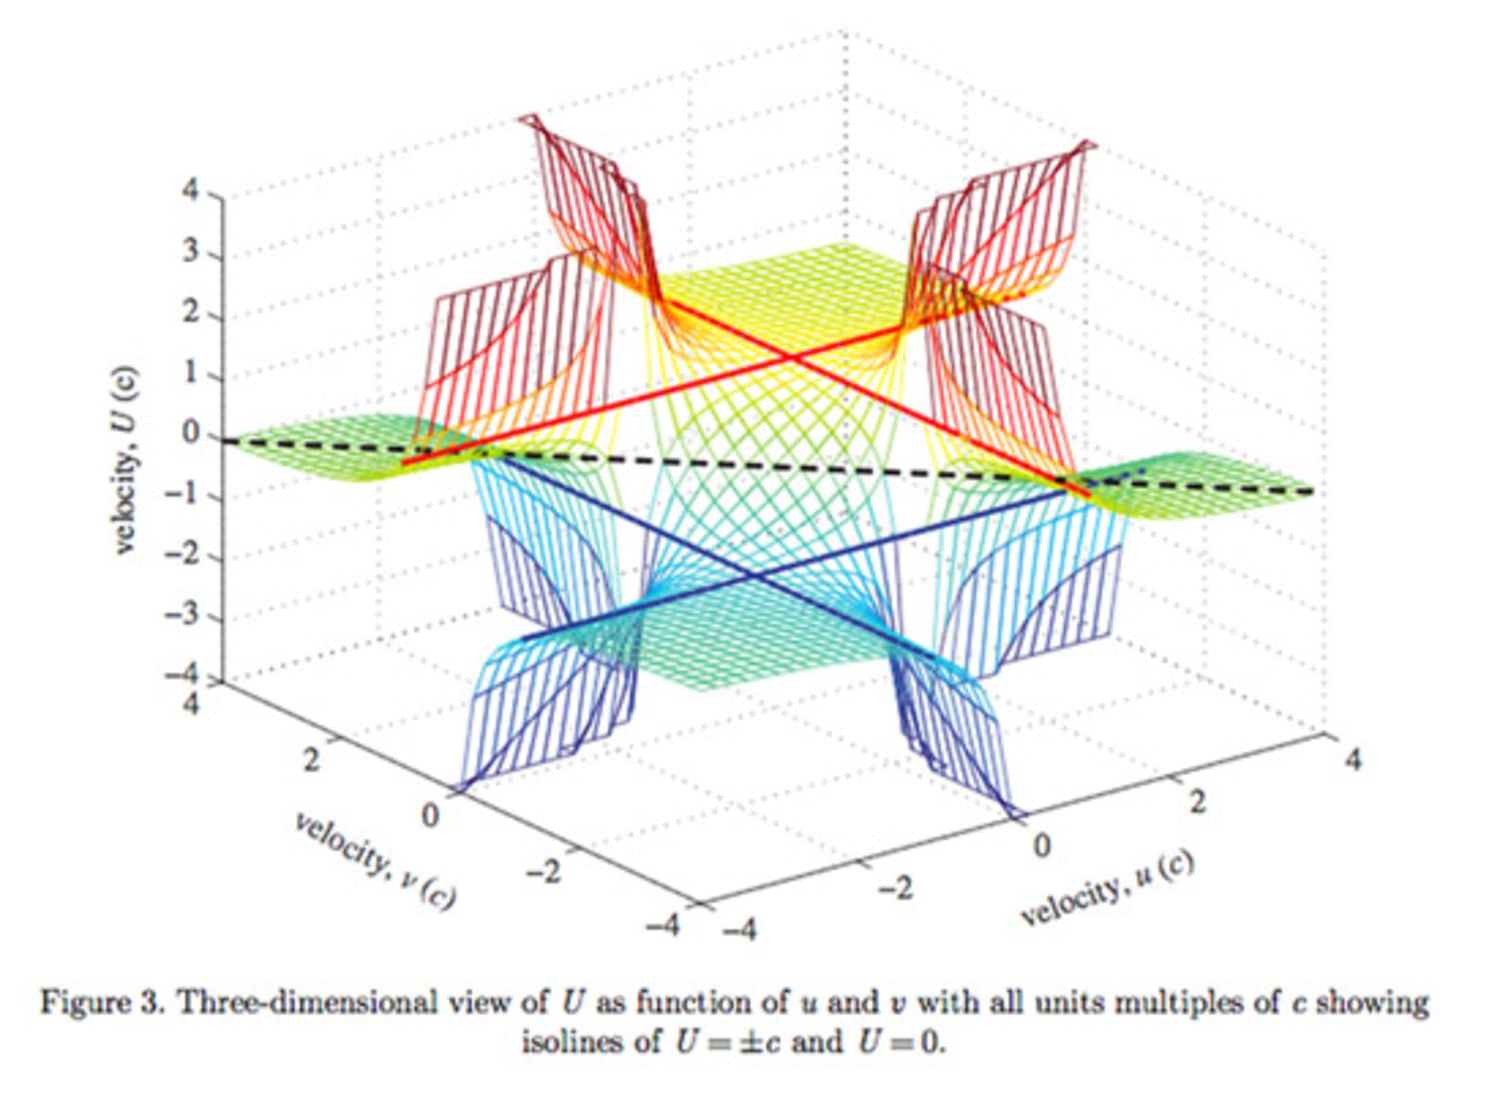 arbejder udsultet bassin Einstein's math suggests faster-than-light travel, say scientists